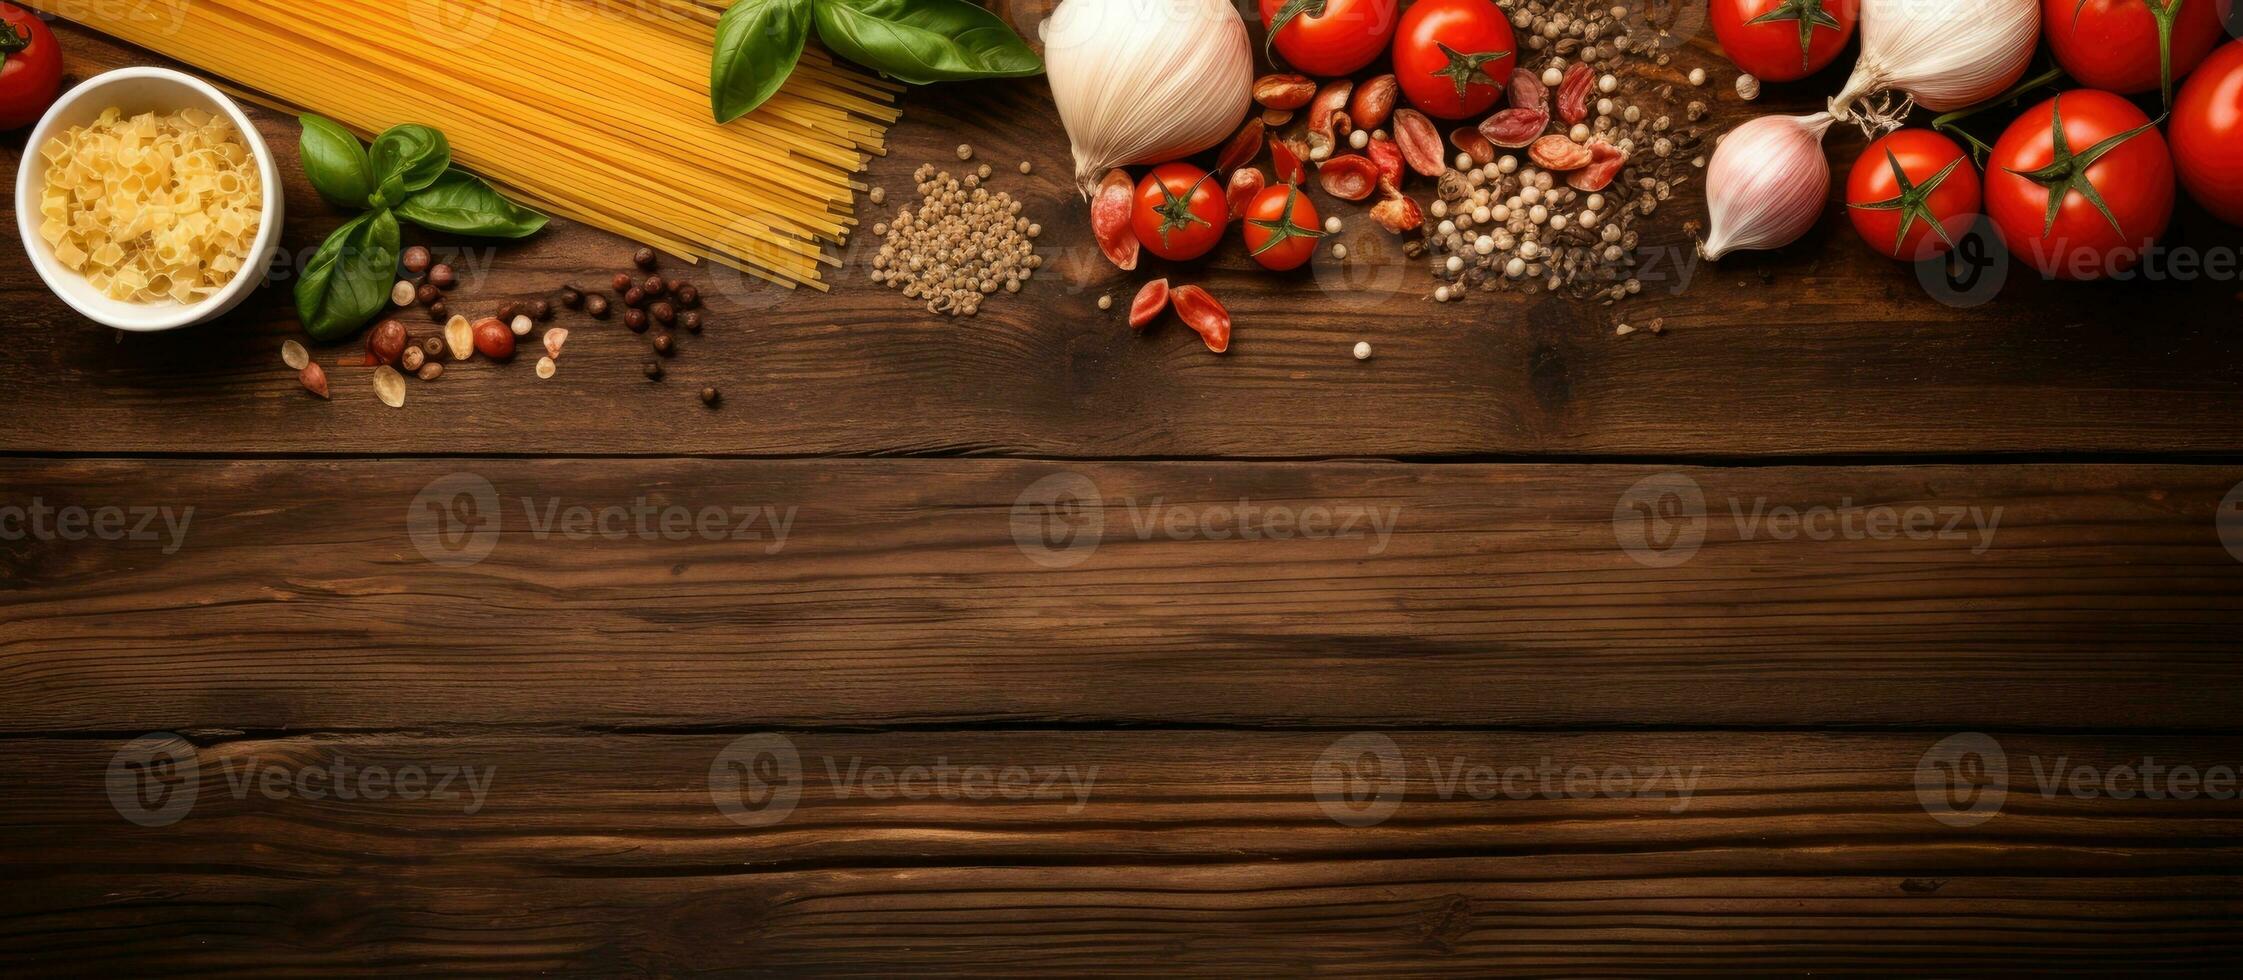 Top view of pasta cooking ingredients on a wooden kitchen table, with space available for your photo